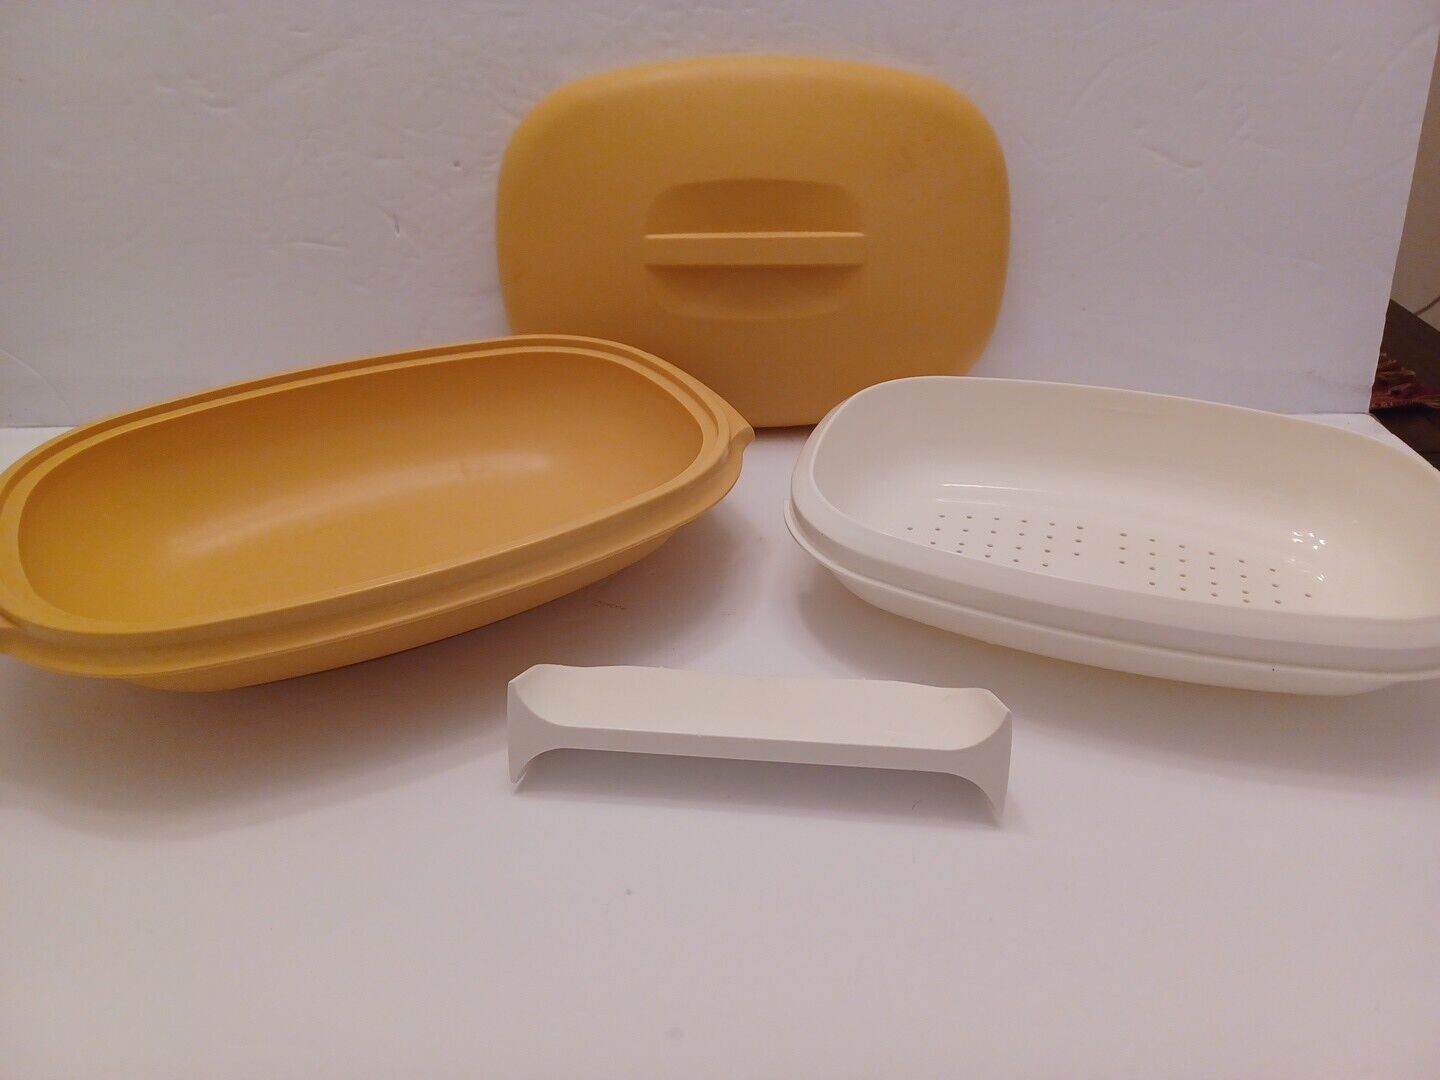 VTG Tupperware Microwave Steamer 4 Piece Harvest Gold Yellow 1273-2 USED